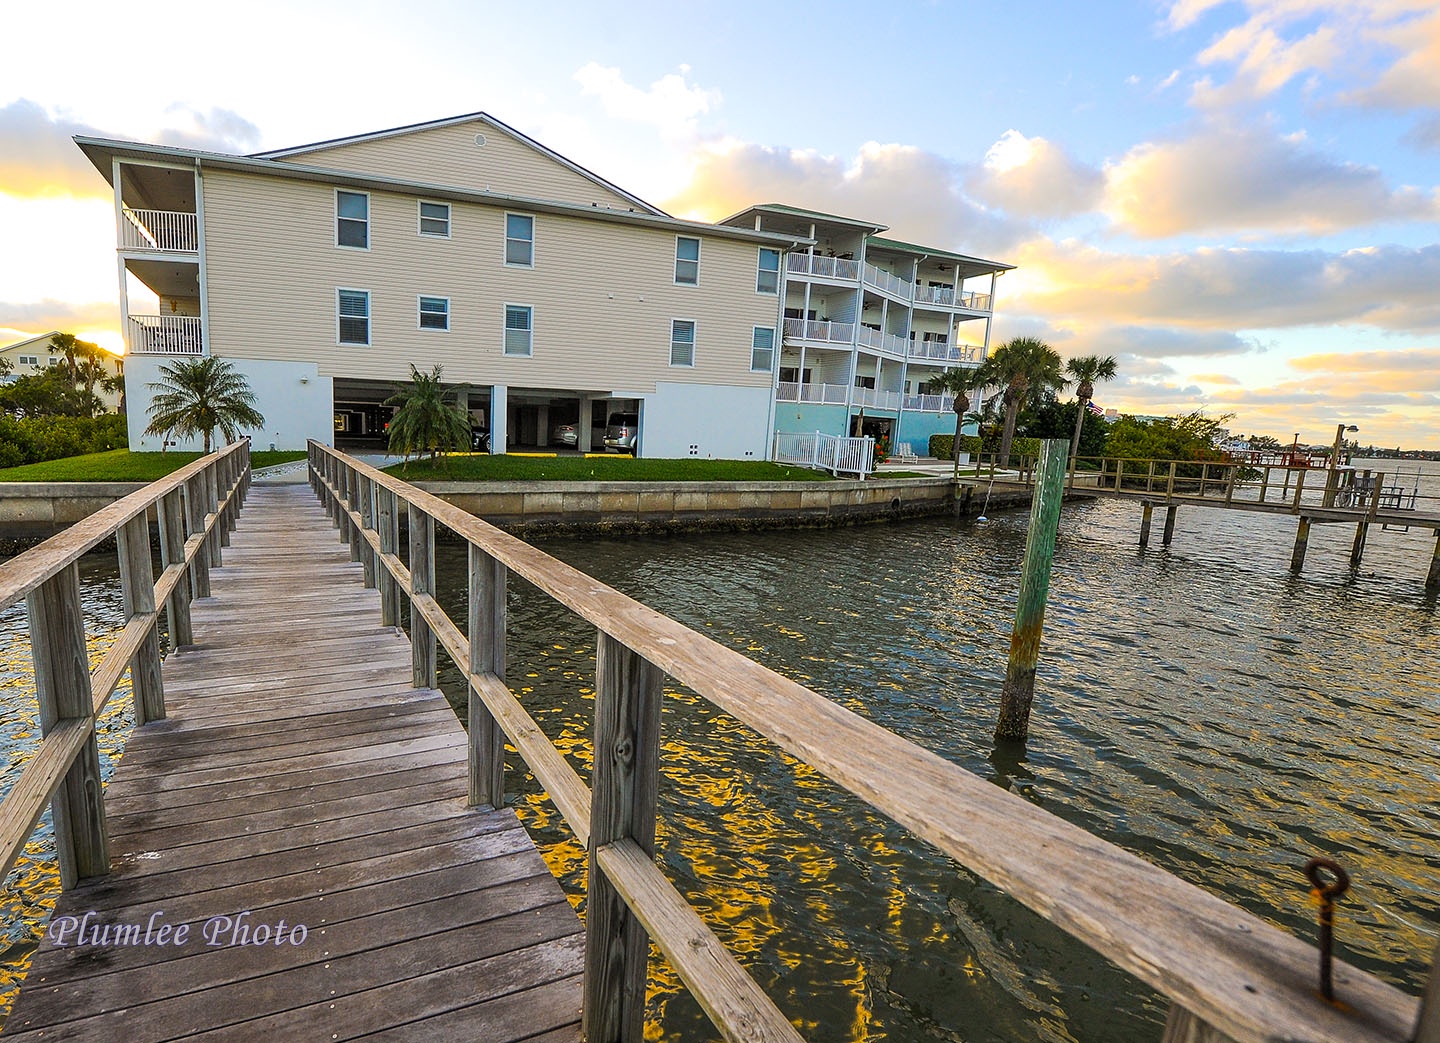 View of the Captain's Cove building from the Fishing Pier